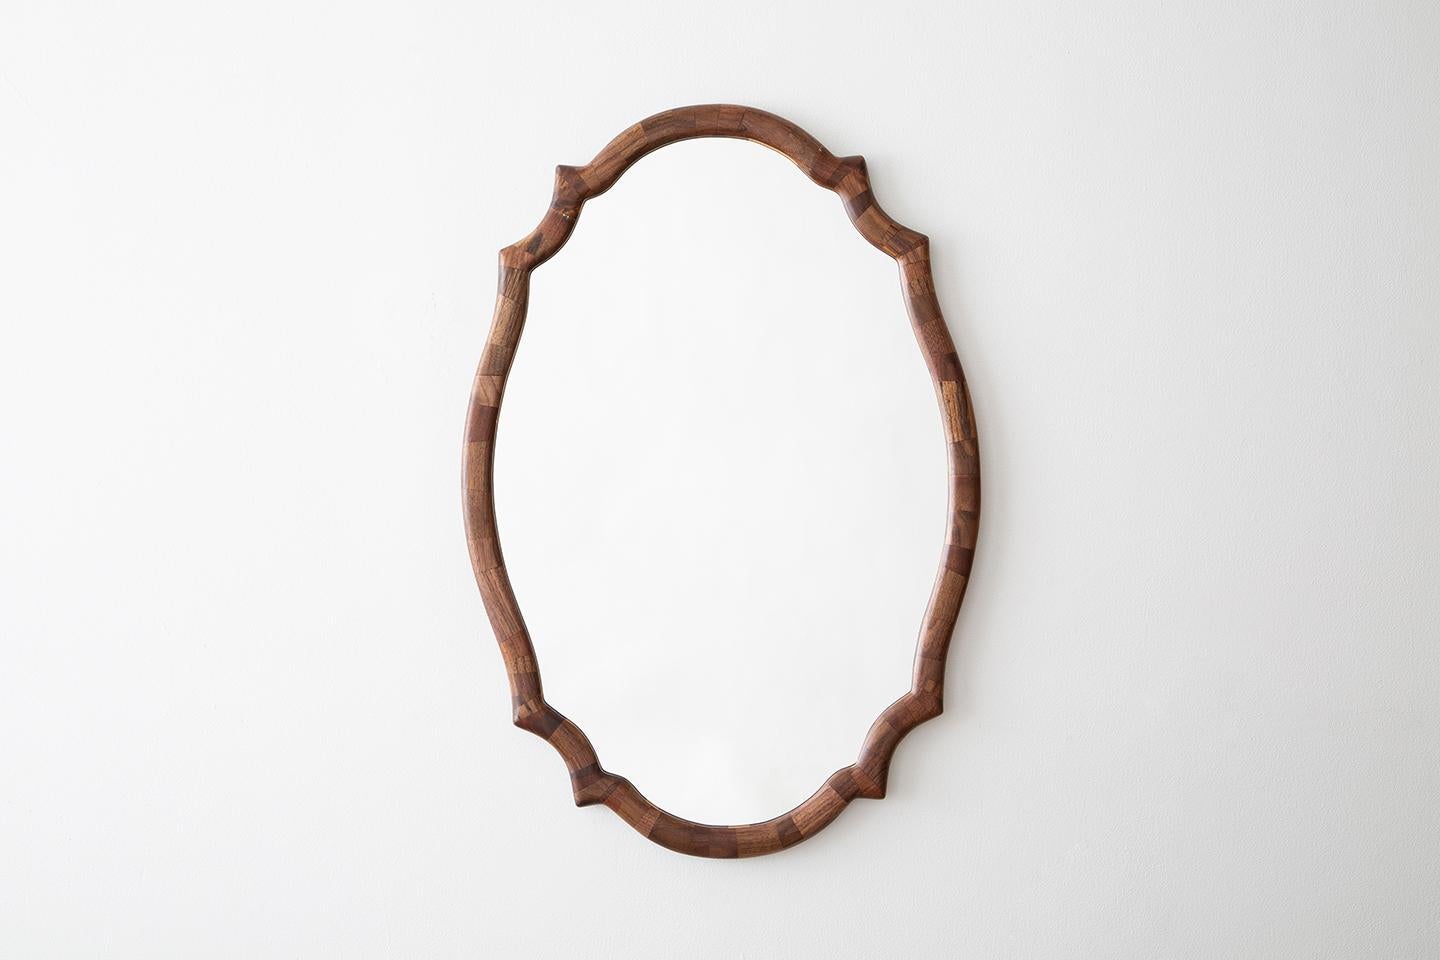 Part of Richard Haining's STACKED collection, the frame of this scalloped mirror is shown both in reclaimed mahogany as well as salvaged walnut, but is 